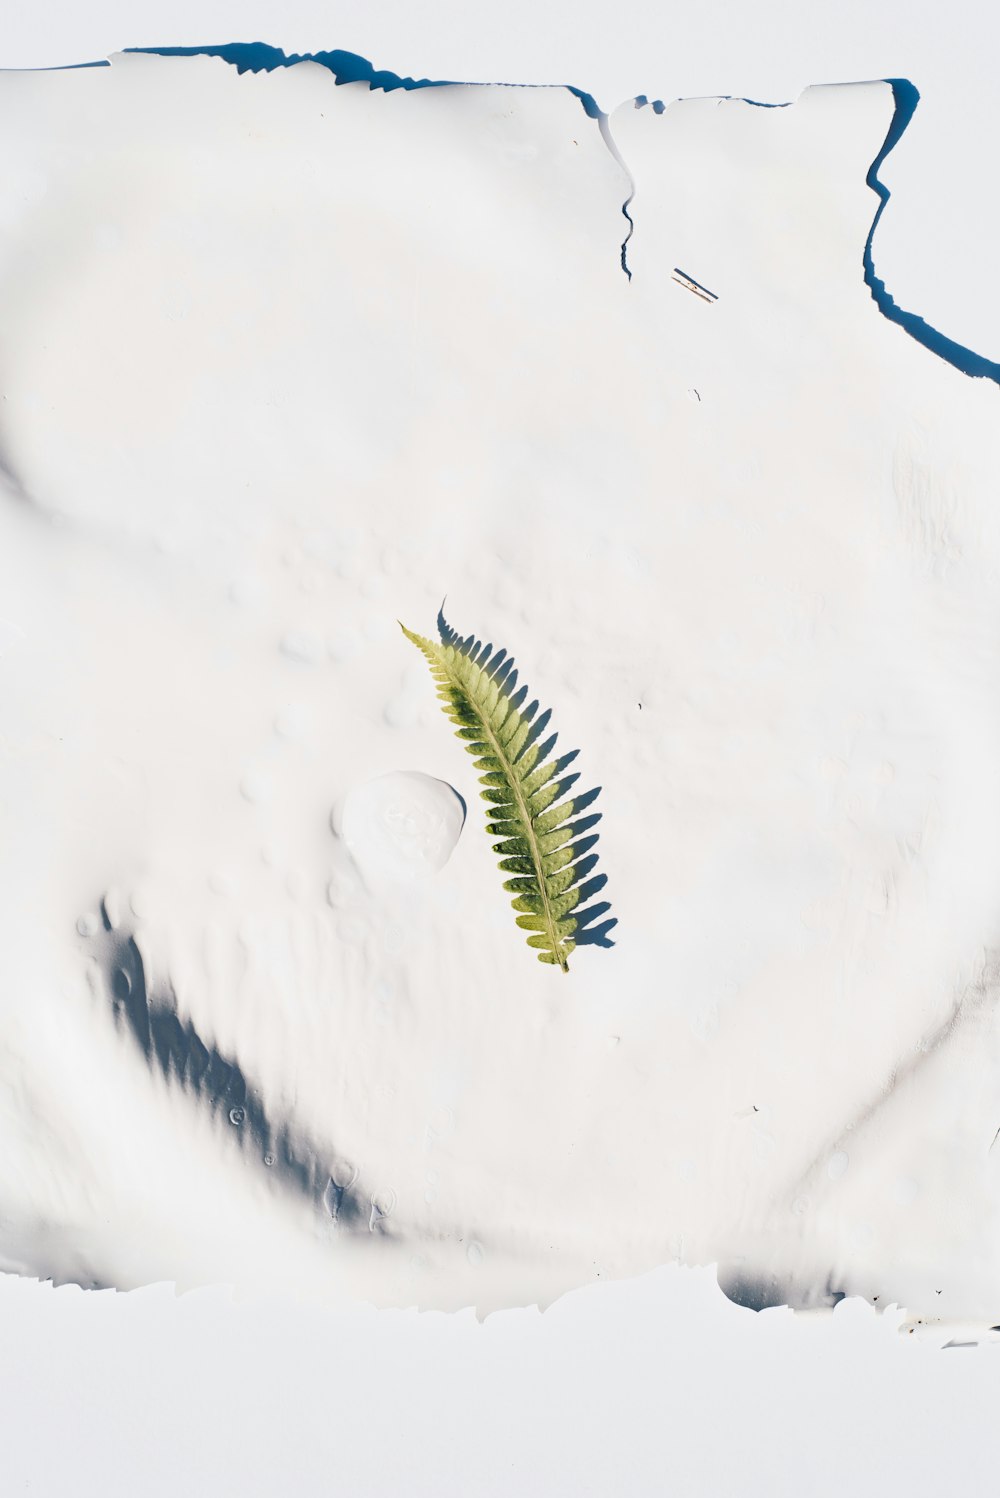 green and blue caterpillar on white snow